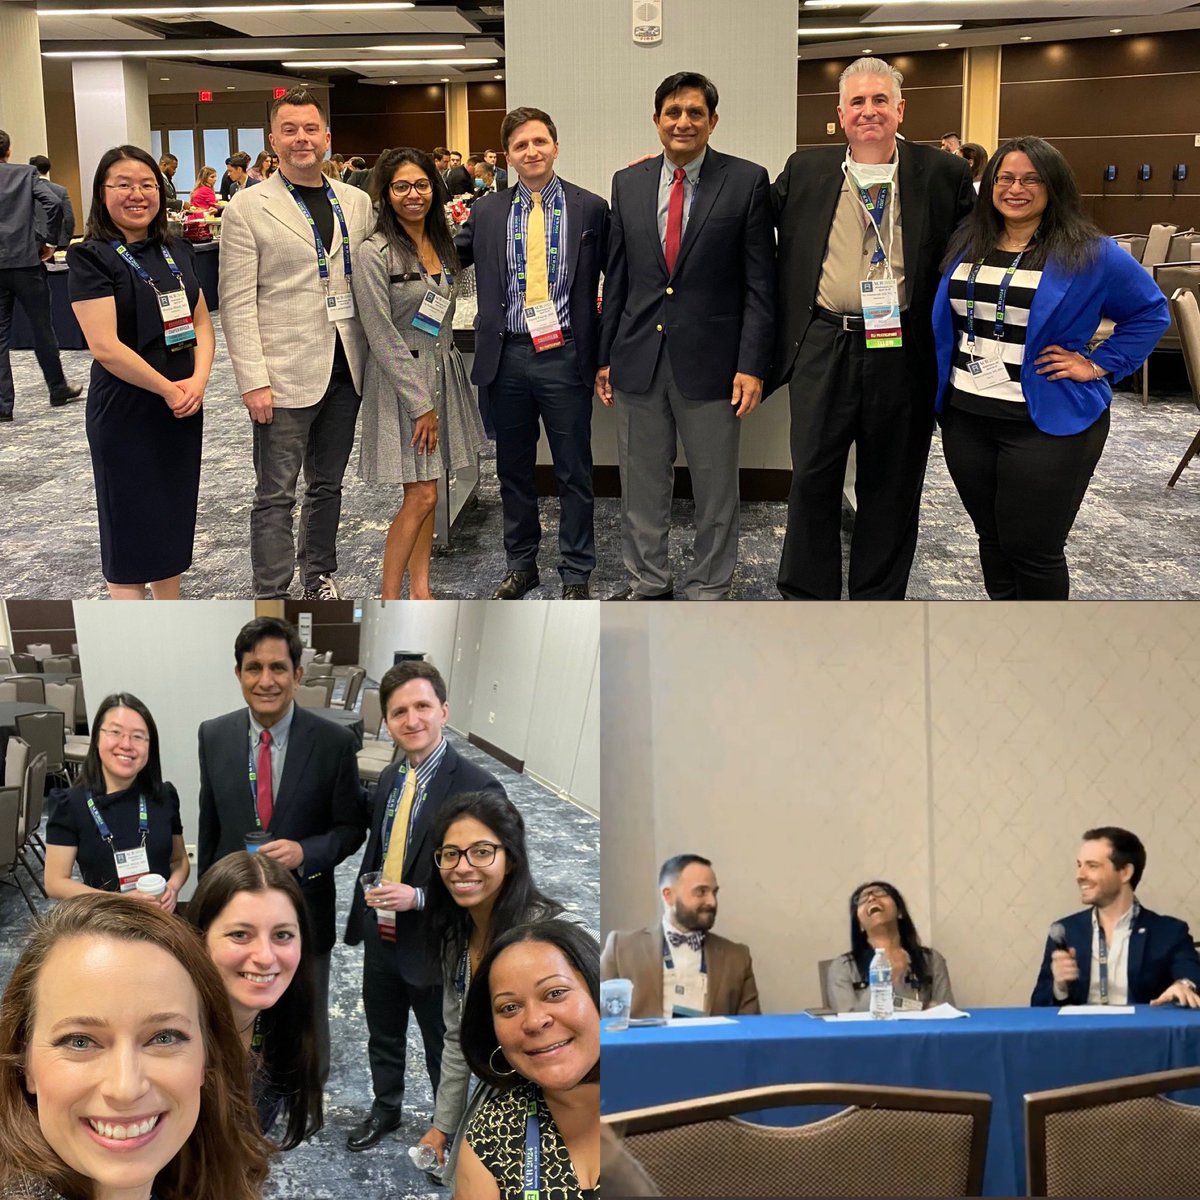 Finally got my fave pics from #ACR2024 together. Today I’ll post about the awesome Programming. What an honor to speak to the @ACRYPS and @ACRRFS about advocacy and practice types. @DrIanWeissman @RadiologyACR